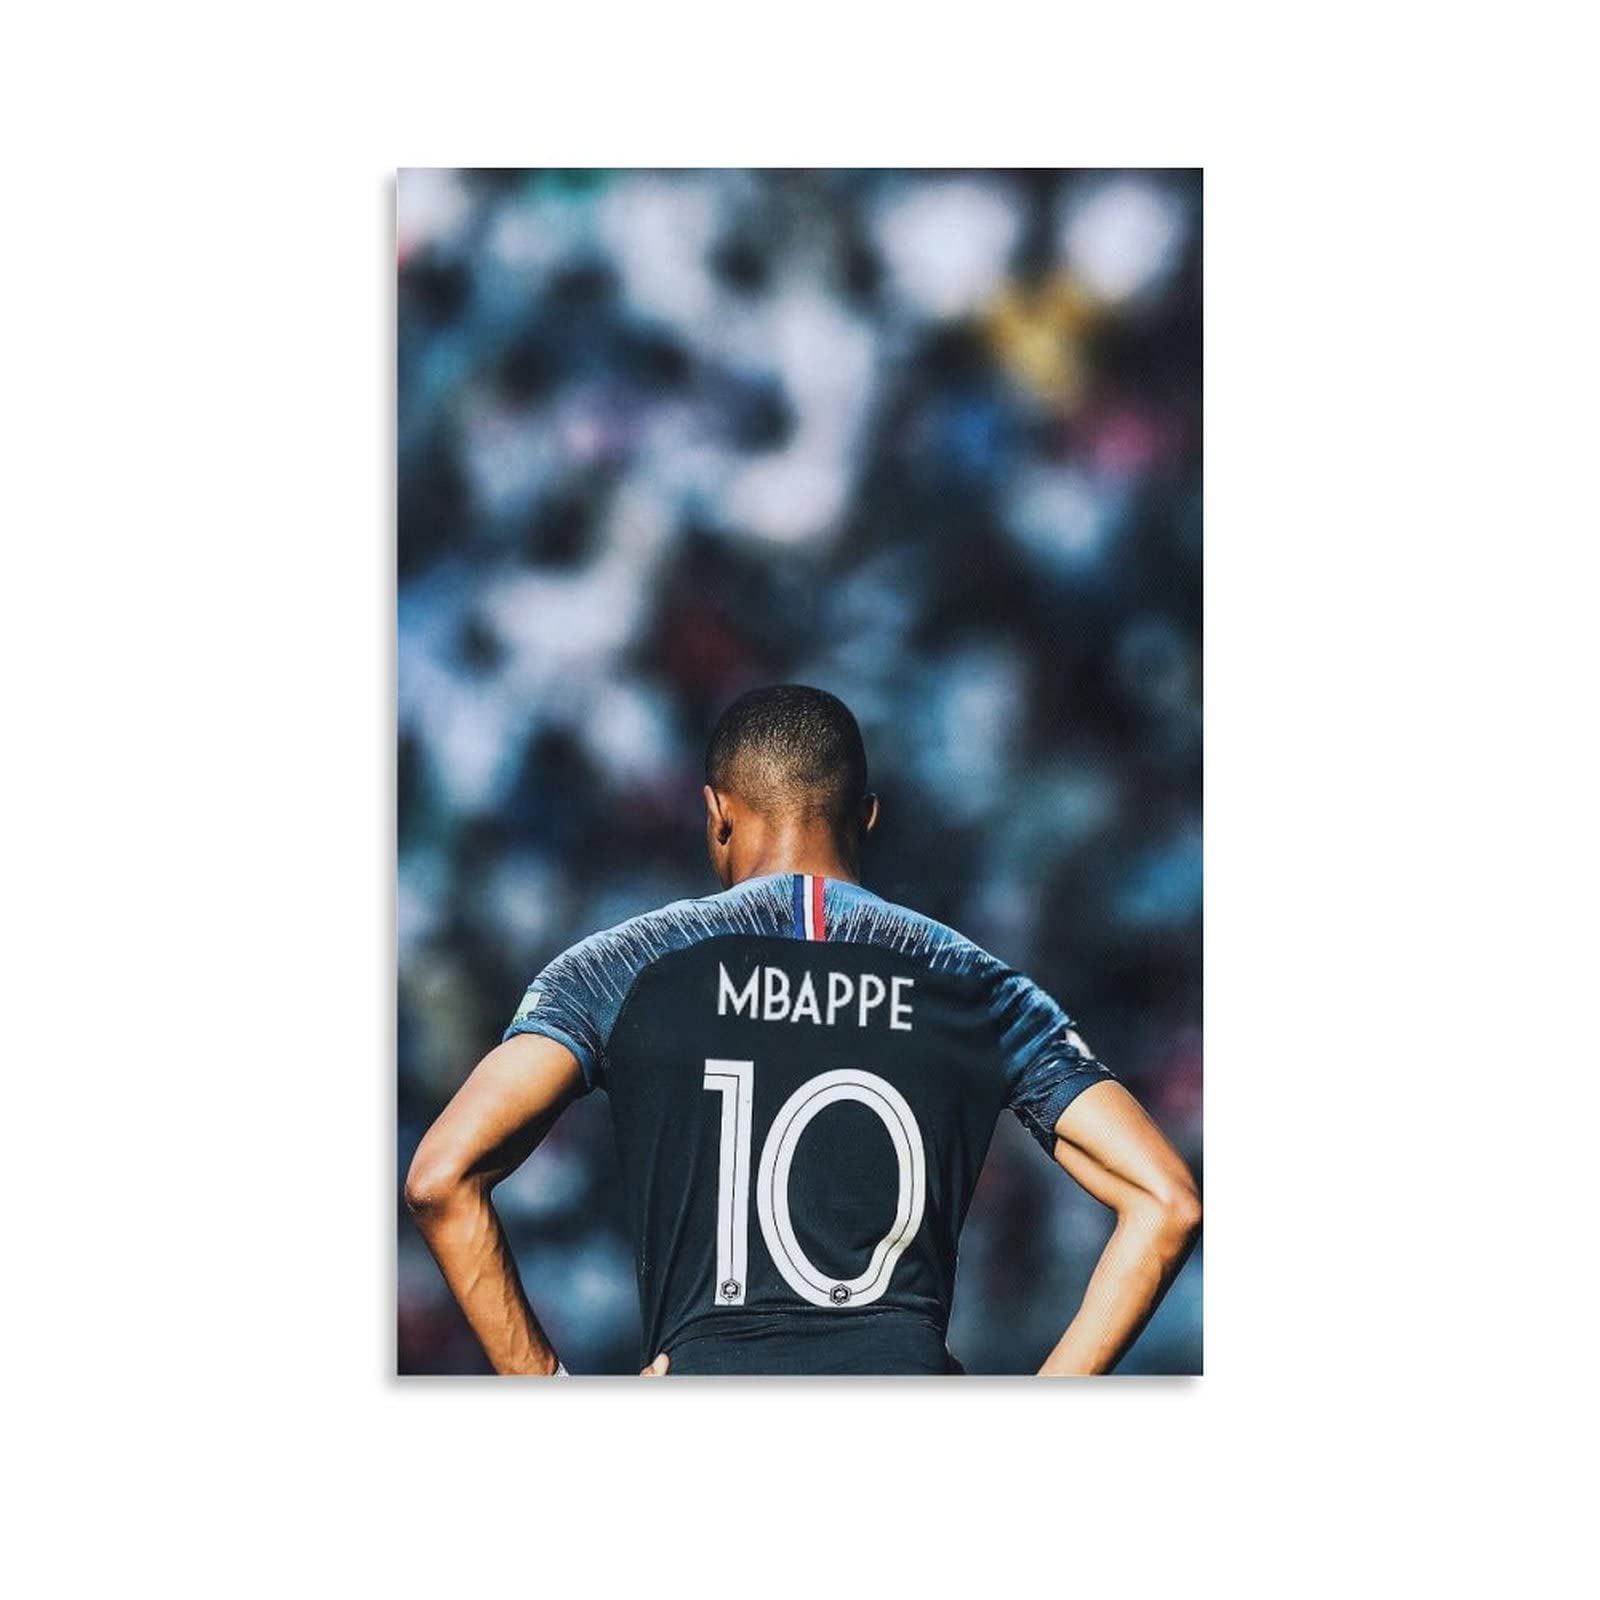 Kylian Mbappe Poster (48)Football poster canvas material wallpaper mural suitable for office, living room, bedroom20x30inch(50x75cm), Amazon.co.uk: Home & Kitchen